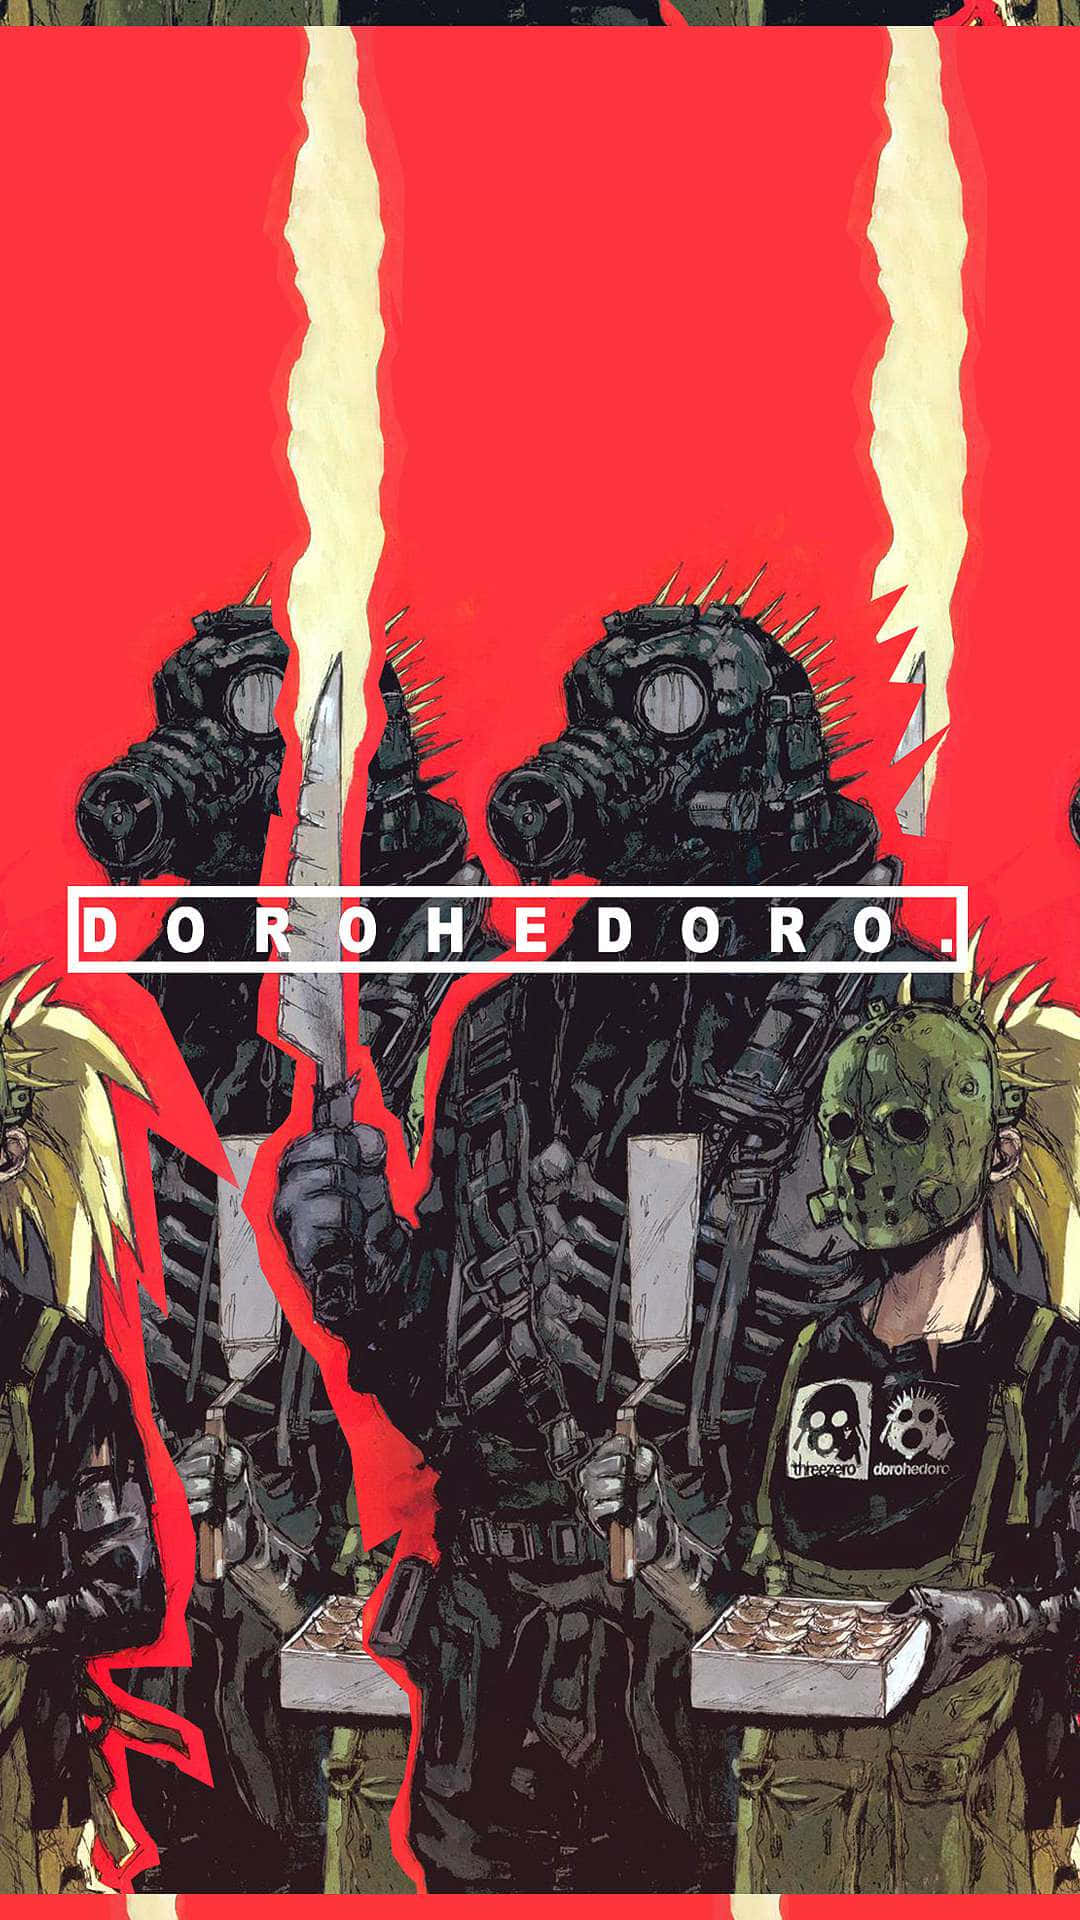 Two Of The Main Characters In Dorohedoro, Caiman And Nikaido